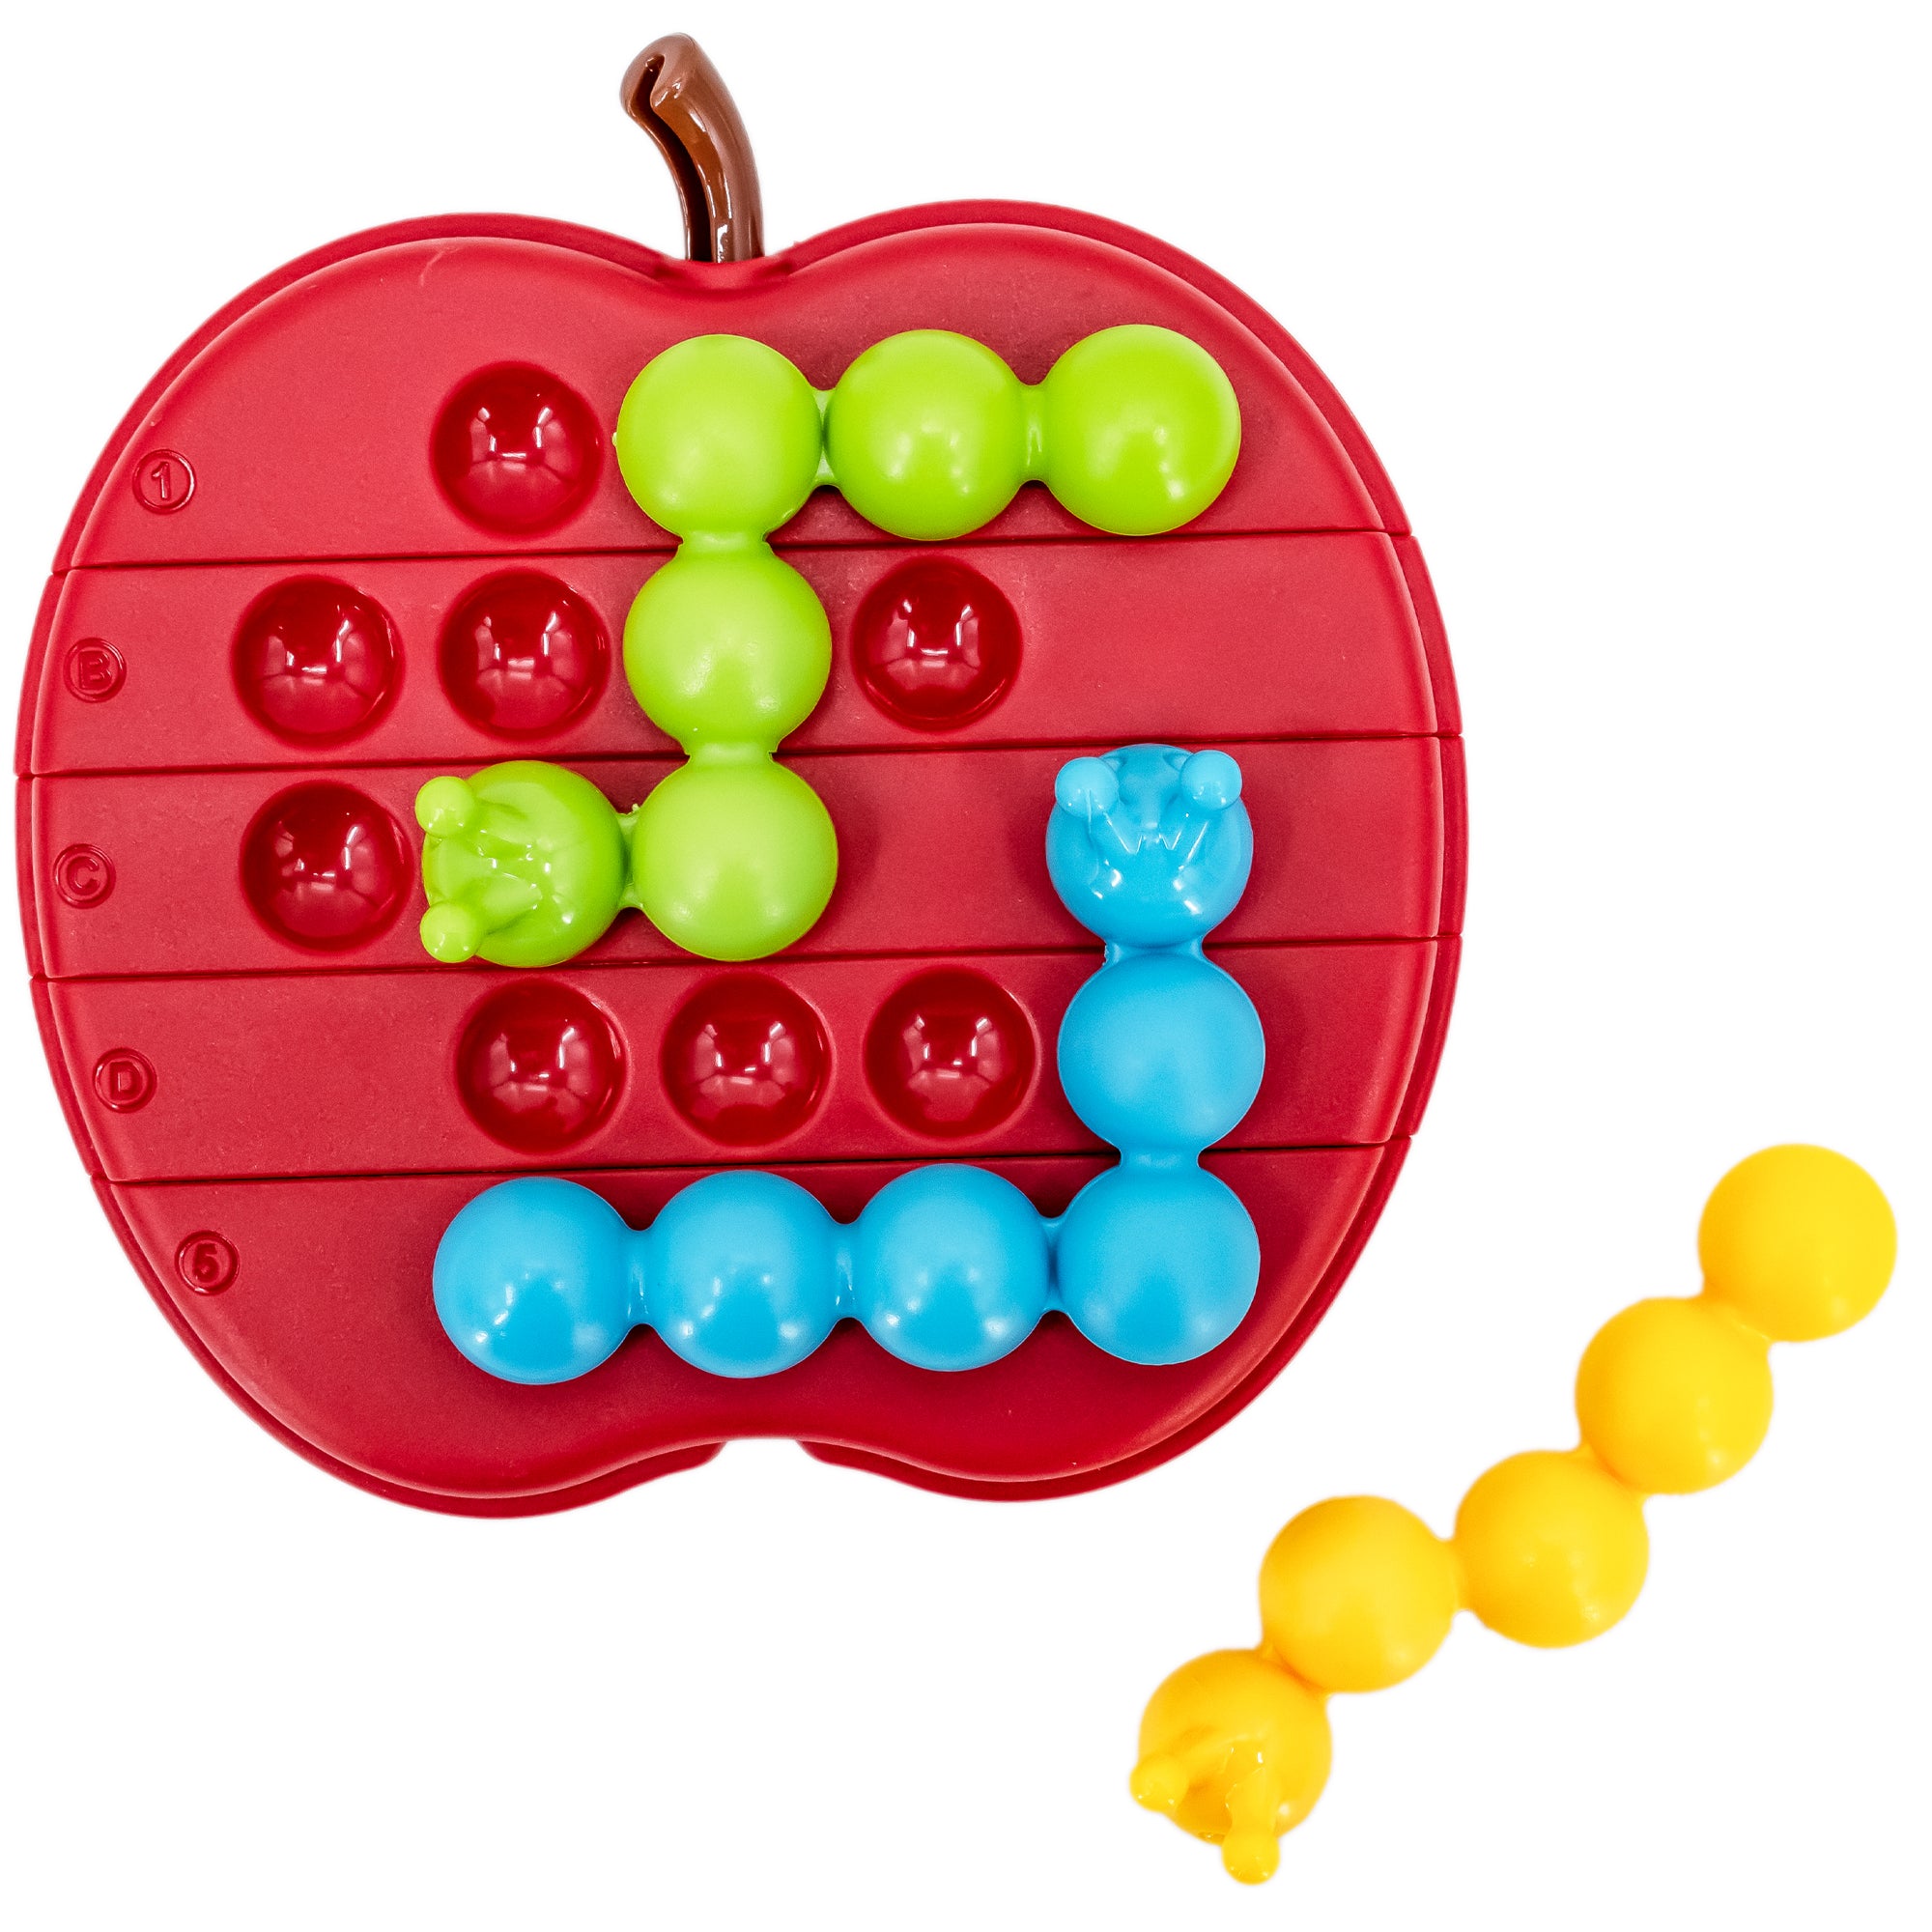 The Apple Twist Smart Game laid out with the green and blue caterpillar pieces in place on the board and the yellow caterpillar off to the right side, waiting to be put in place. The apple game board is red with a brown stem and has lines through it, indicating that the pieces on the board can be twisted.